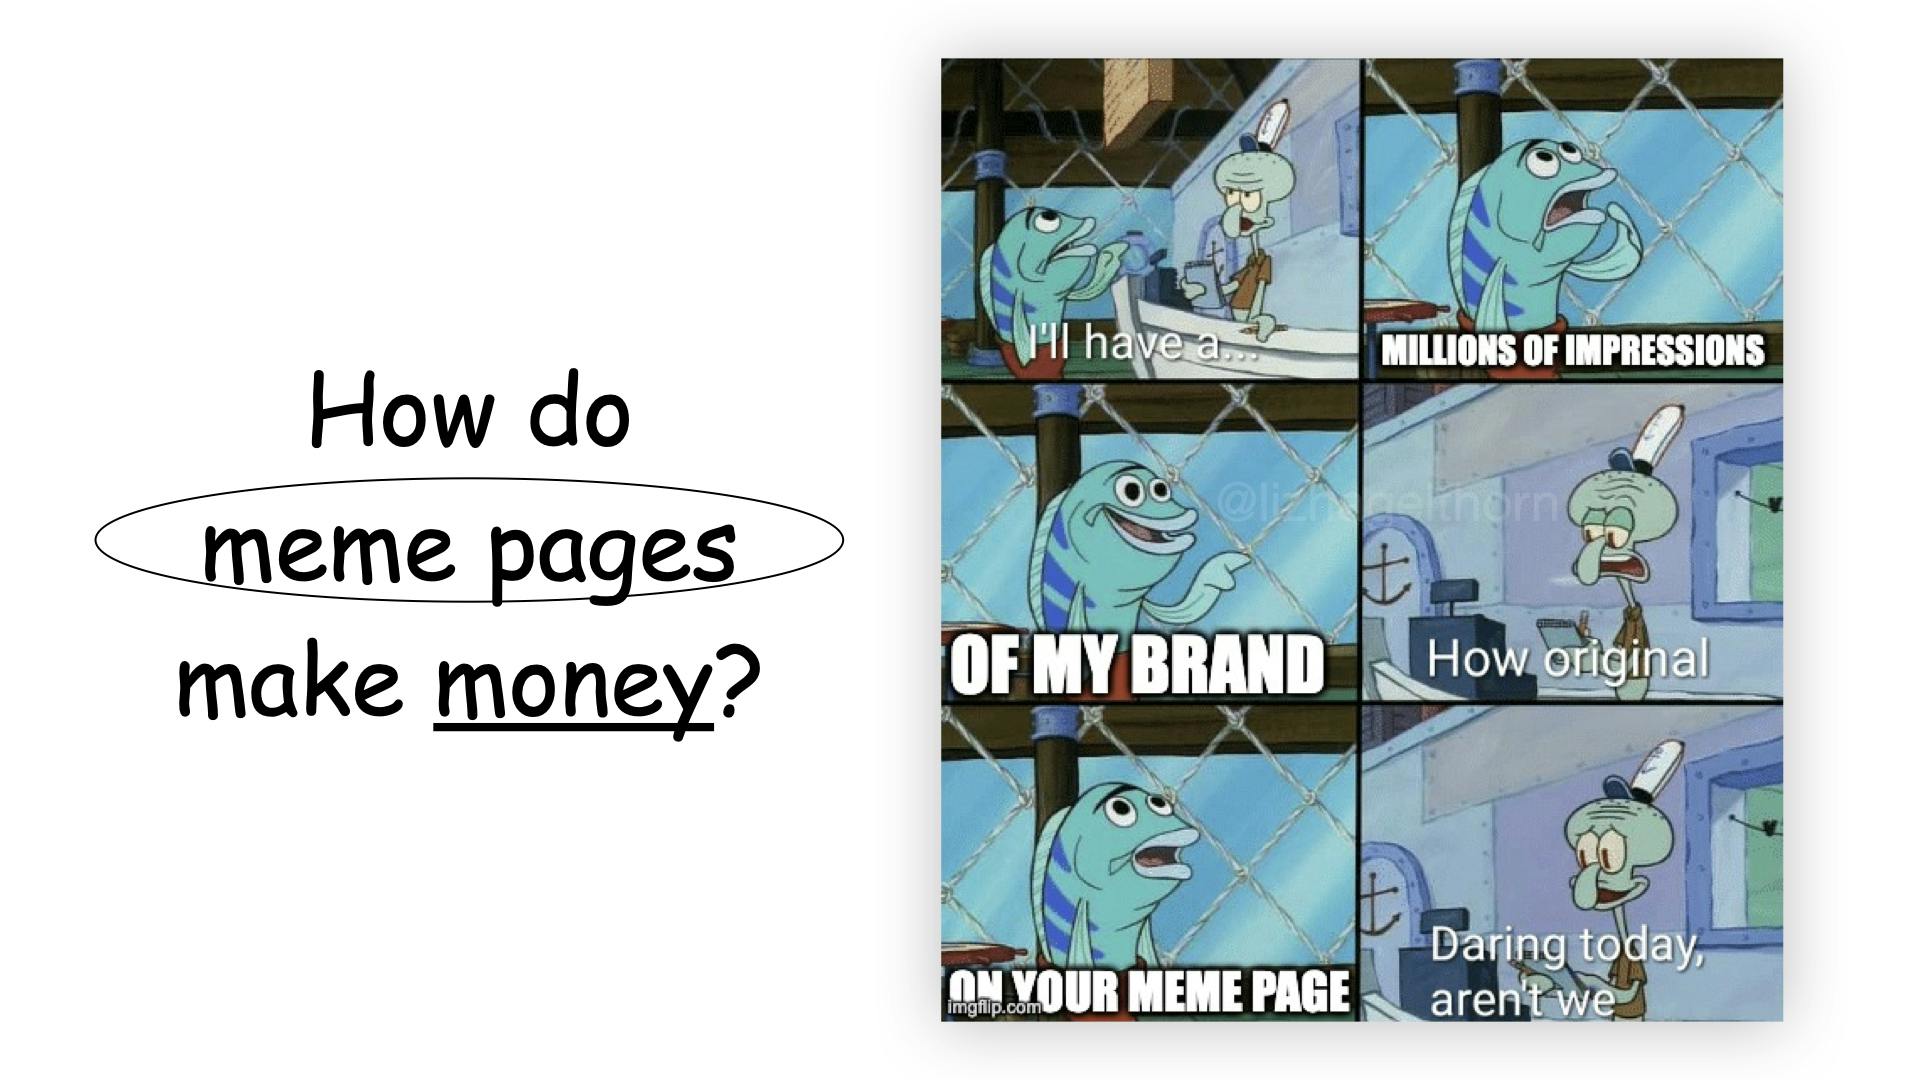 How To Make Money From Memes - Marketing Mind